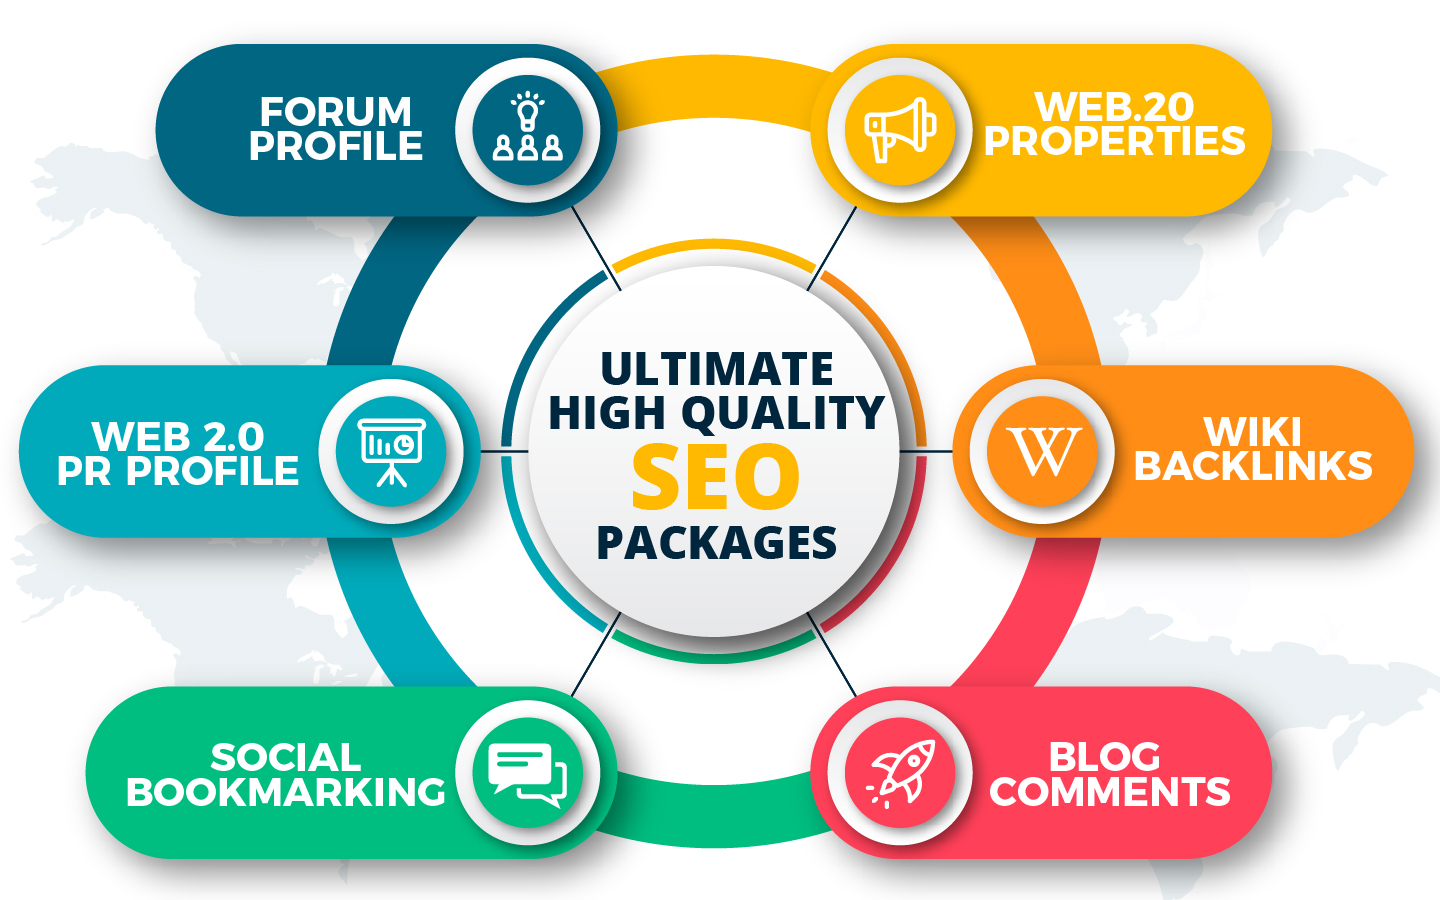 Version 2.0 Shoot Your Site Into TOP Google Rankings With All-in-One High PR Quality Backlinks for $19